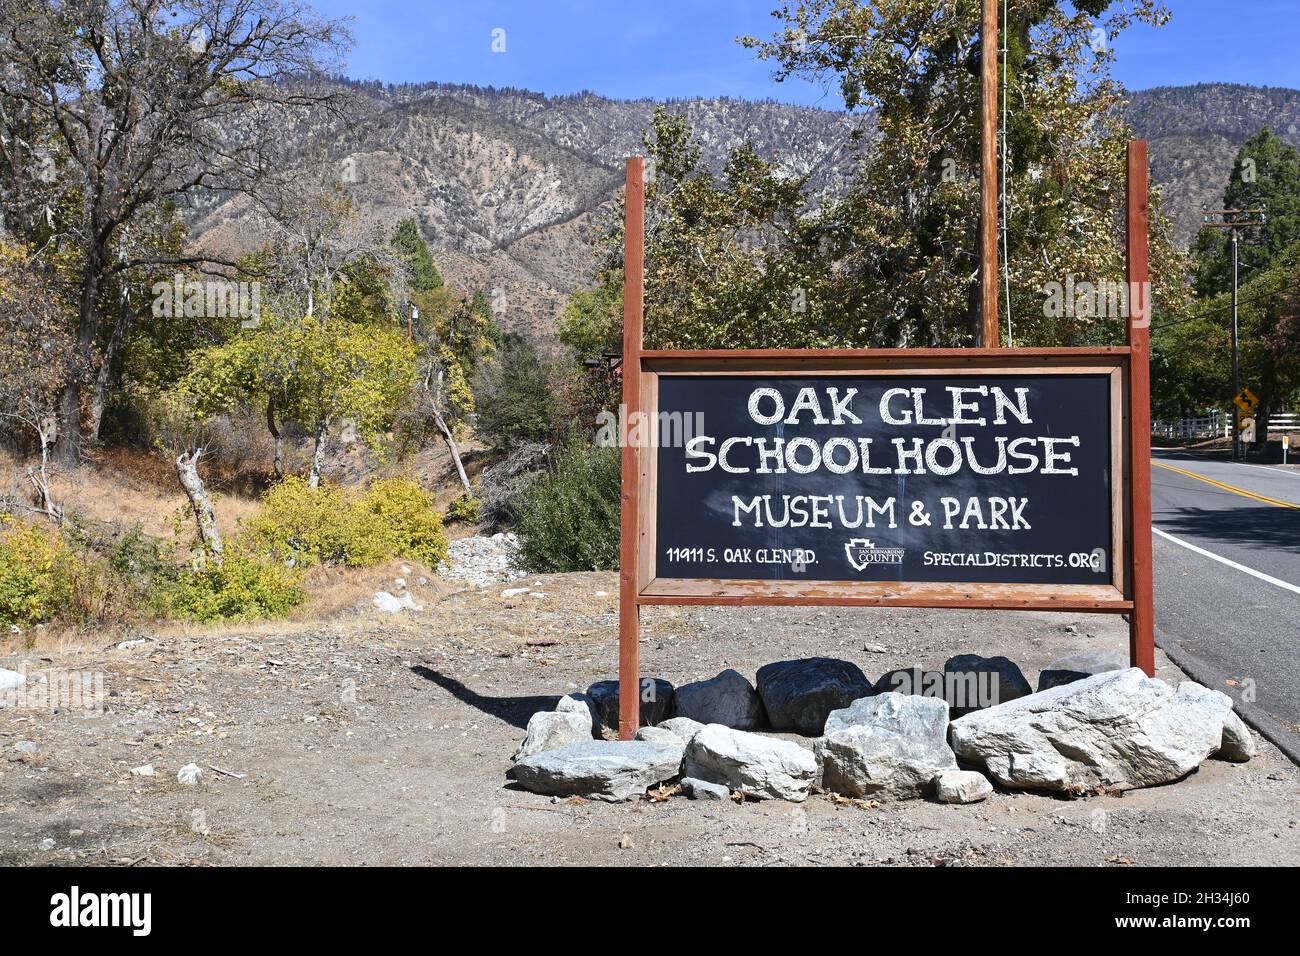 OAK GLEN, CALIFORNIA - 21 OCT 2021: Sign for the Oak Glen School House now a Museum was built in 1927 and is surrounded by a park with picnic tables, Stock Photo